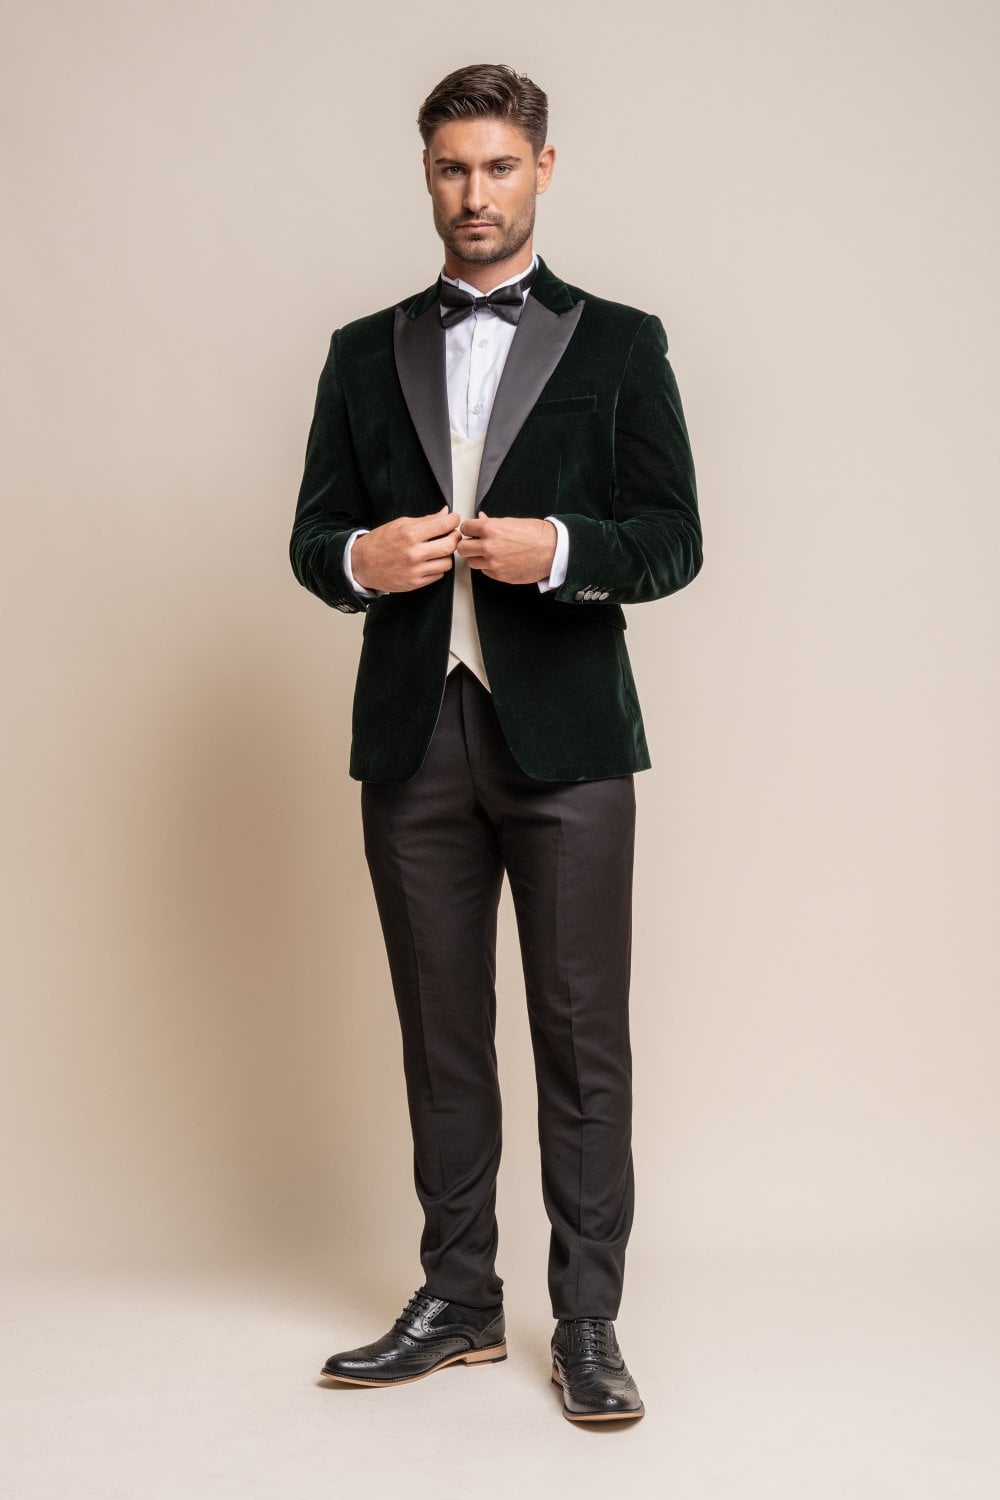 HOUSE OF CAVANI Rosa Forest Green Jacket